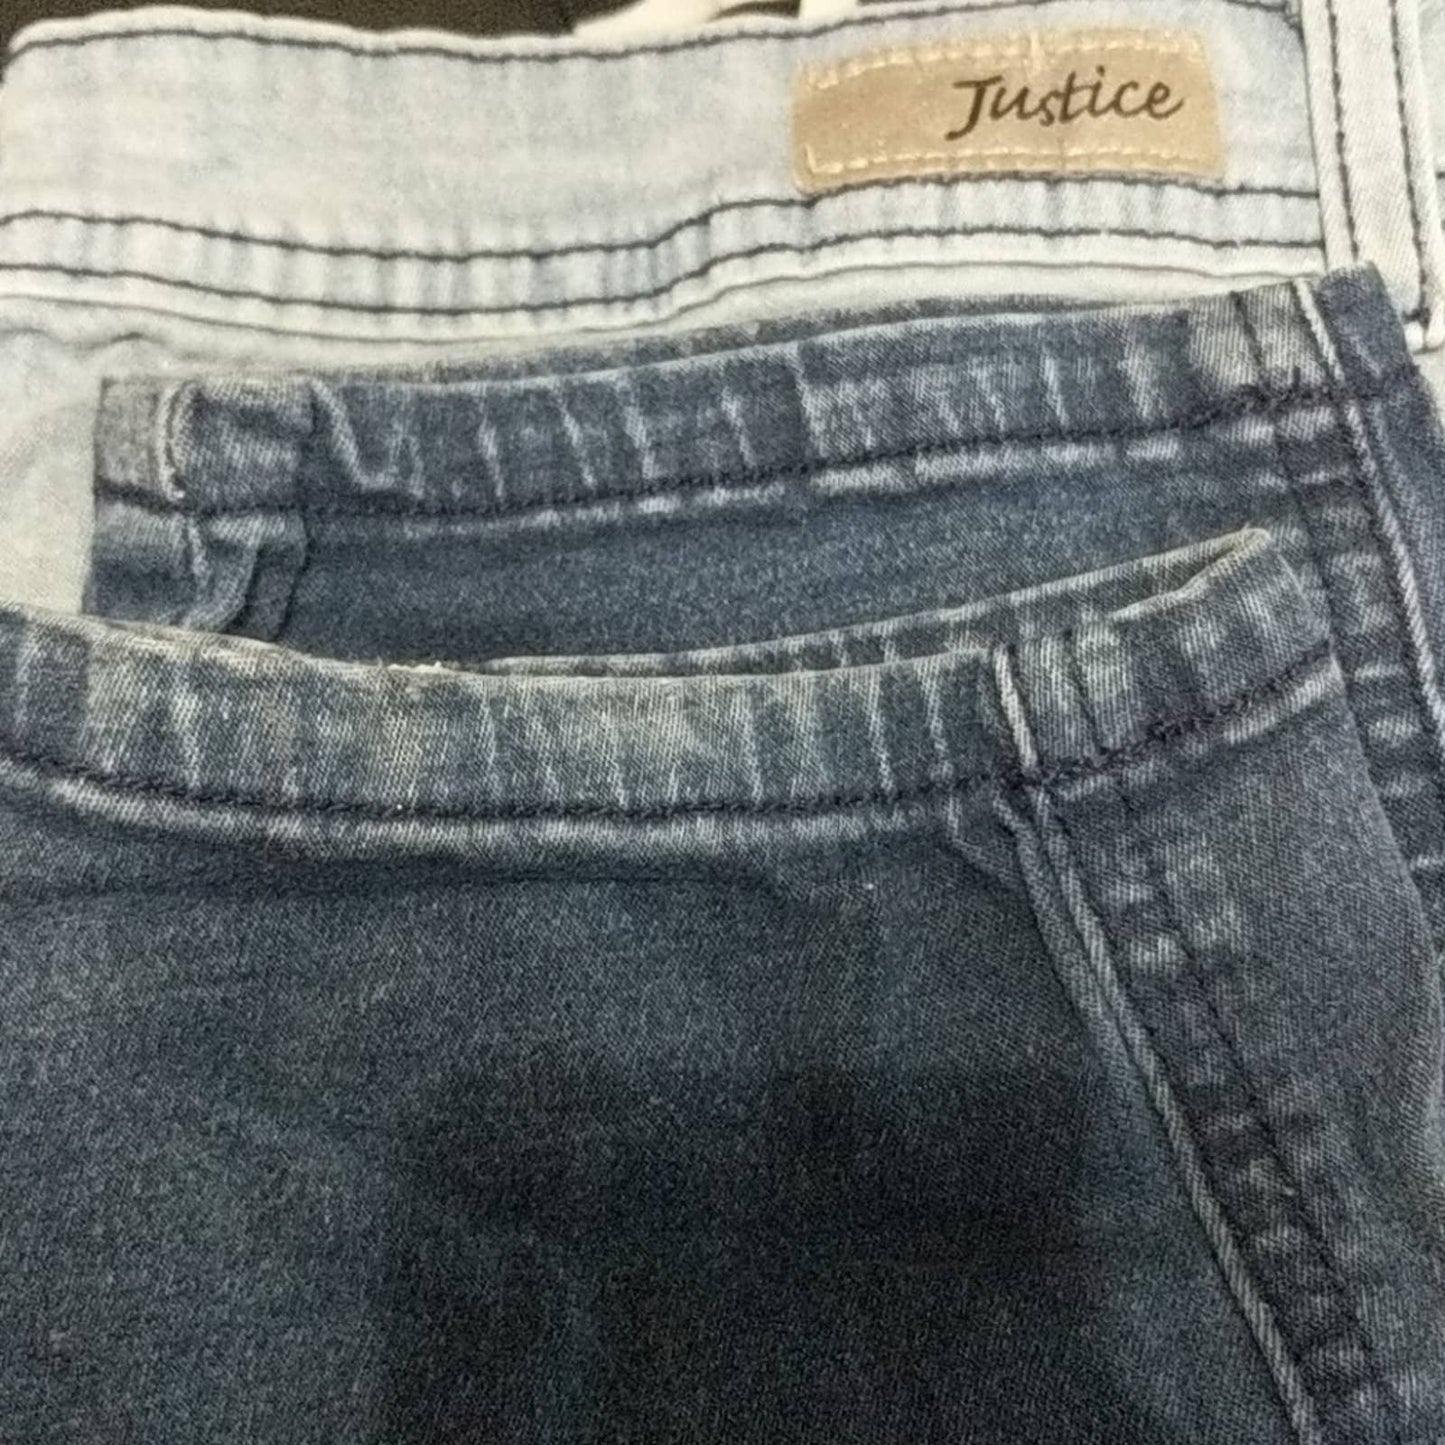 JUSTICE 12.5 Ombre Stretch Skinny Jeans Girls 12 1/2